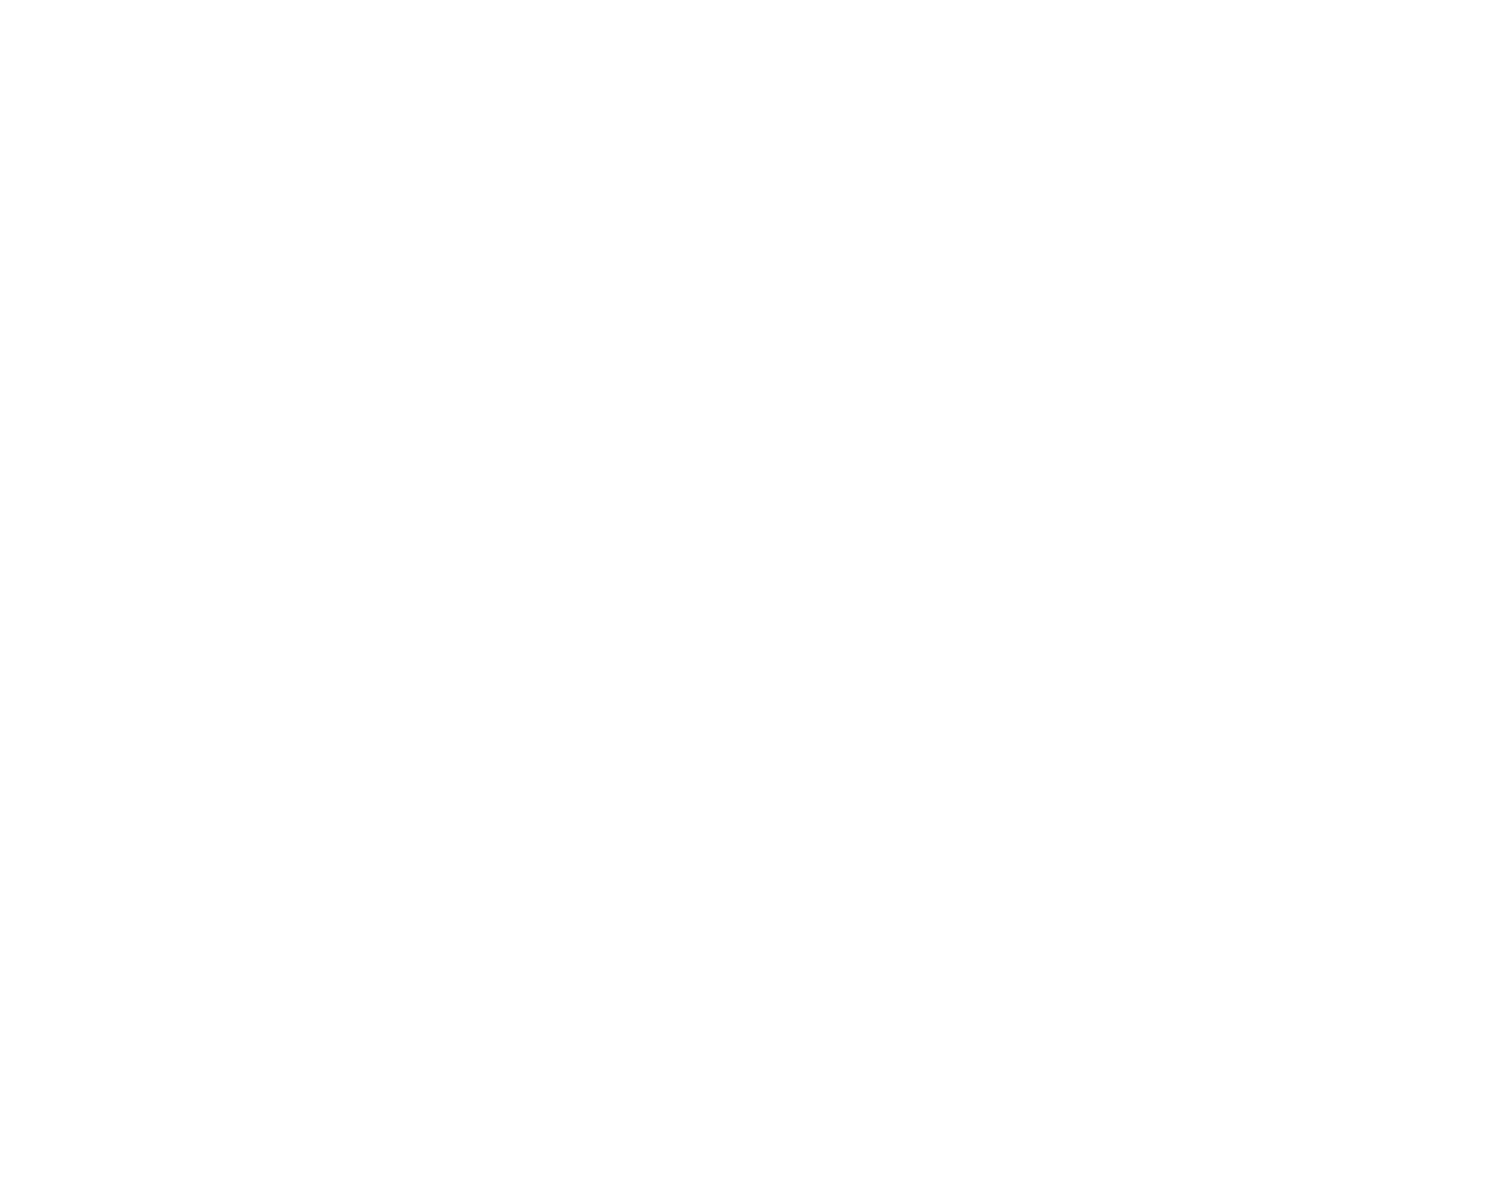 Local Earth Collective